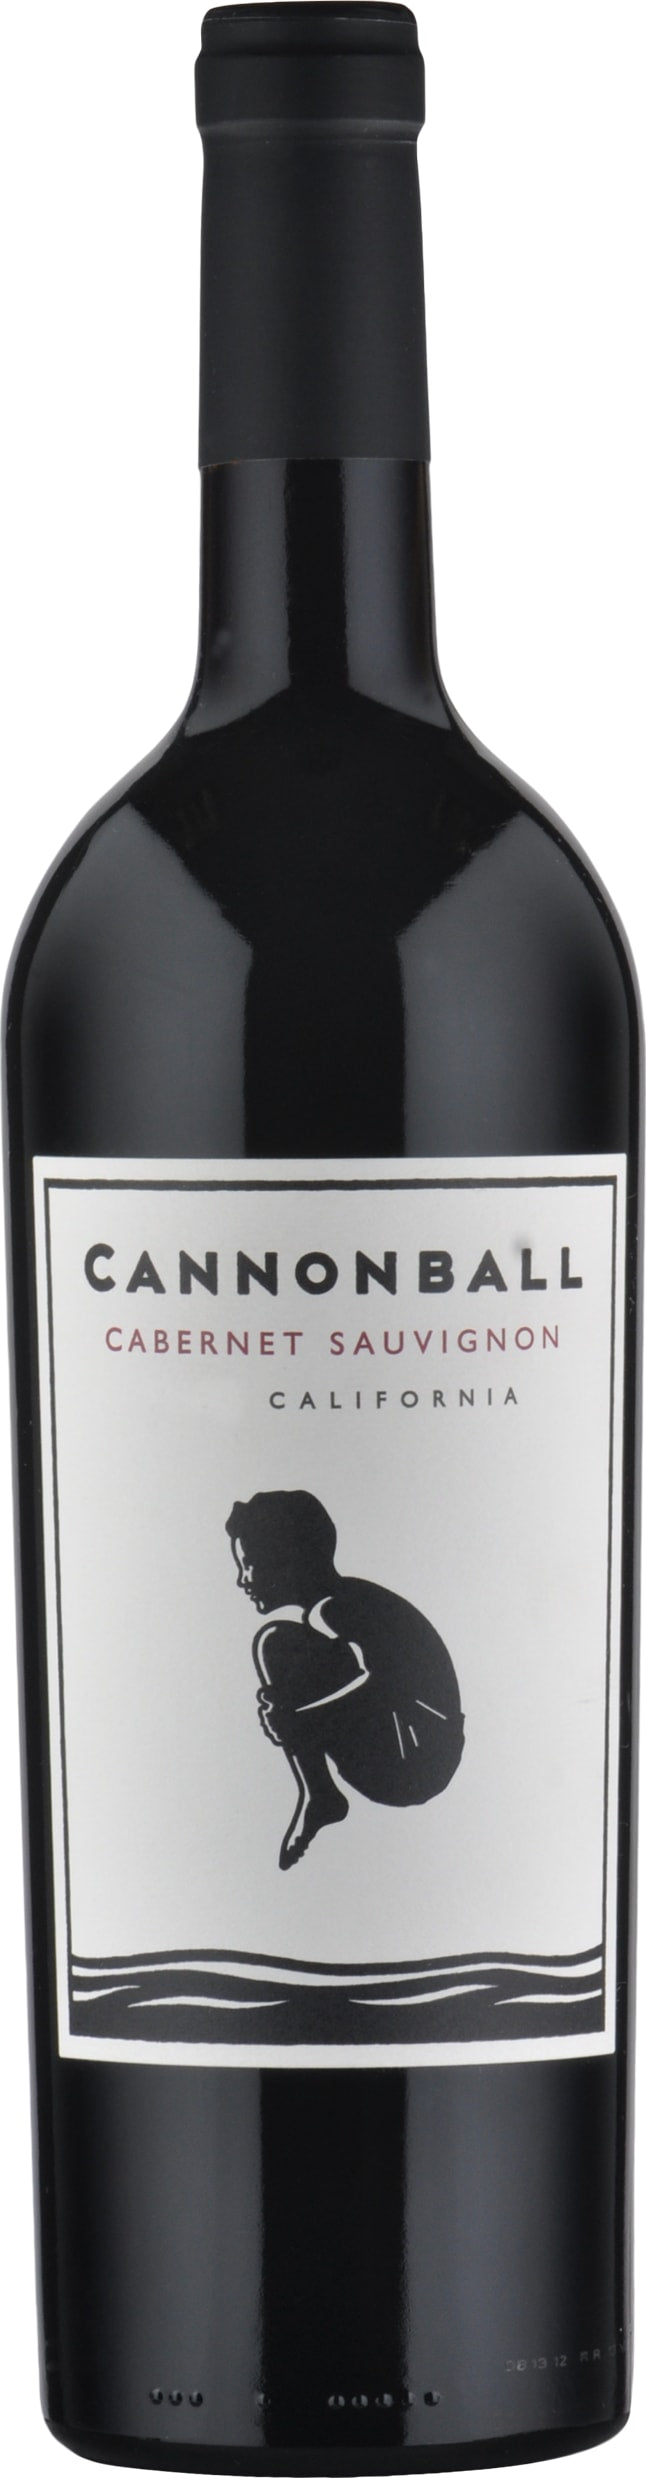 Cannonball Cabernet Sauvignon 2019 37.5cl - Buy Cannonball Wines from GREAT WINES DIRECT wine shop